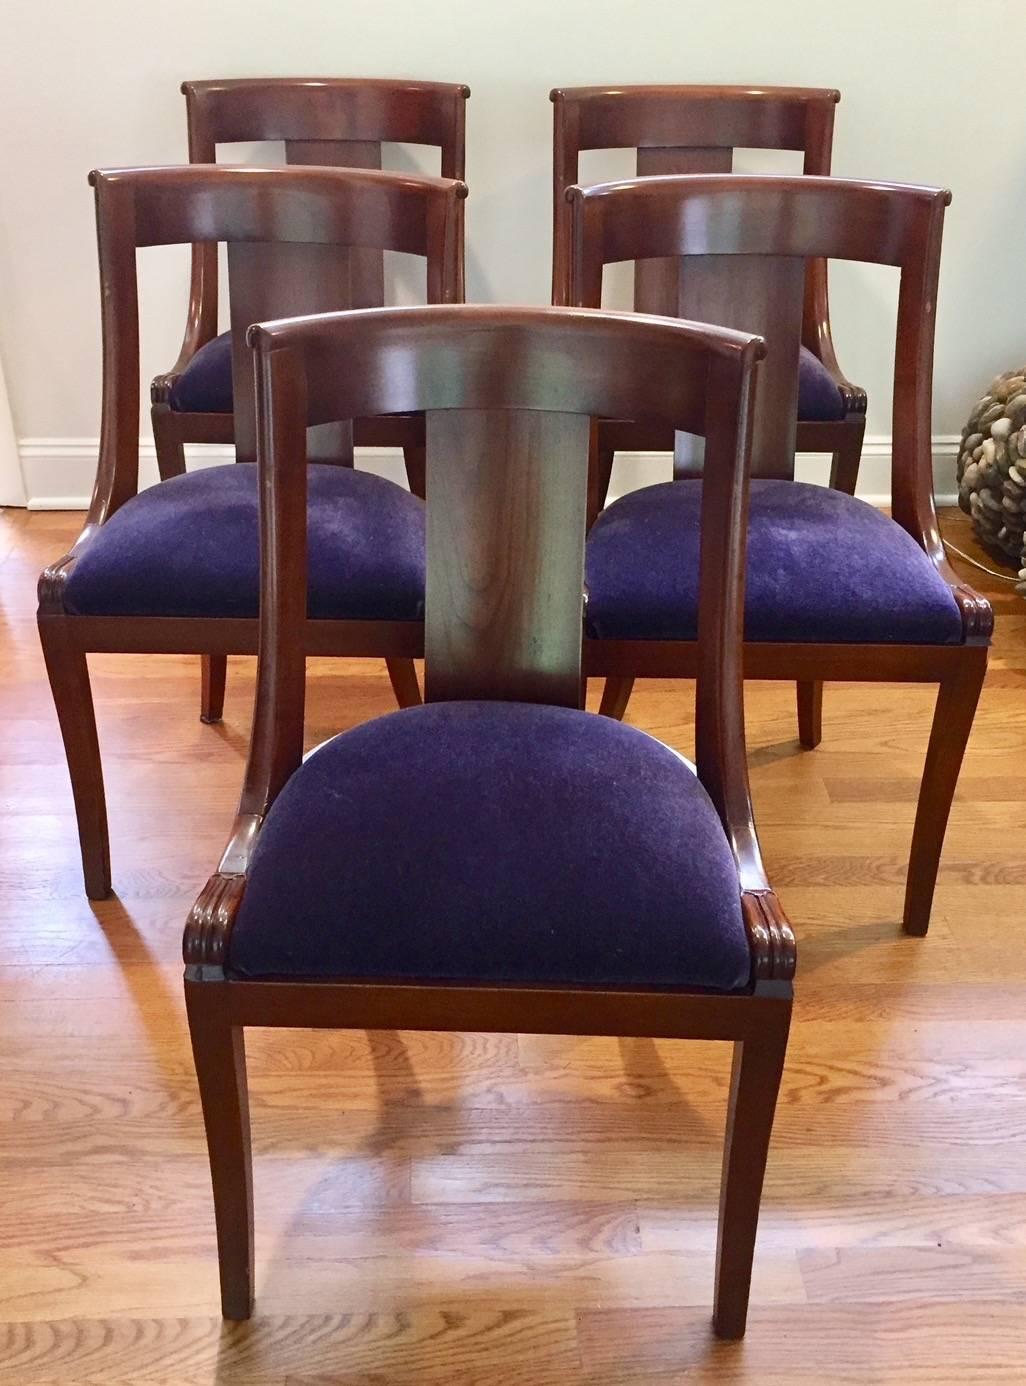 Beautifully elegant 19th century mahogany dining chairs imported from England having lovely simple silhouettes and updated with royal purple mohair seats. A few of the seats are a bit gently used, but we have extra mohair fabric included.